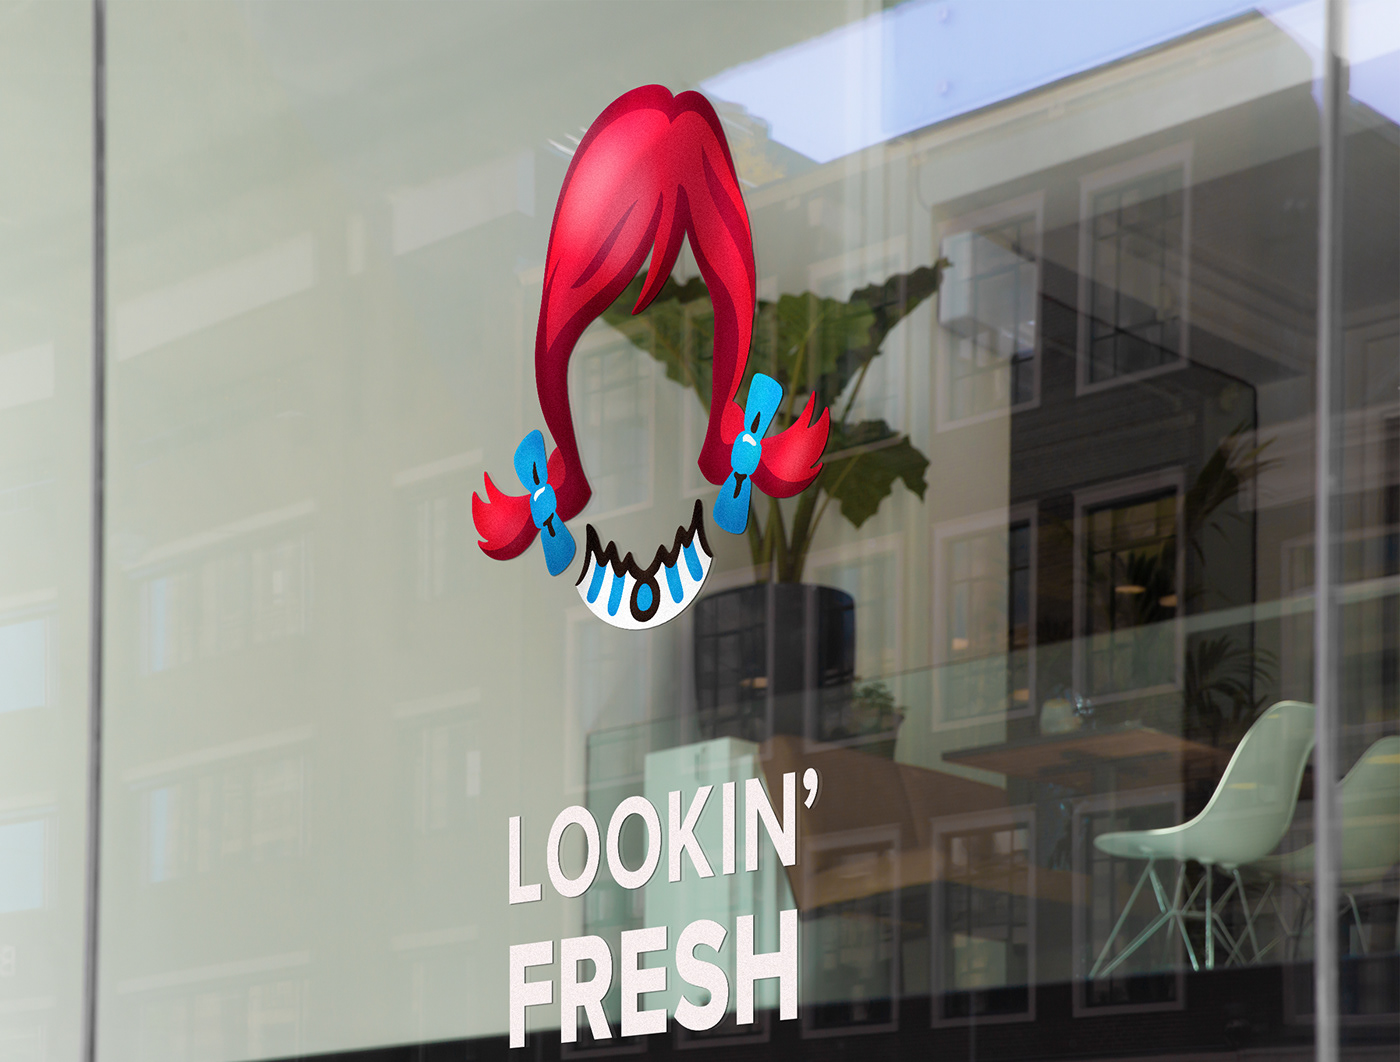 Mockup of ad sticker displayed on window. Passersby would be able to see their reflection in it.